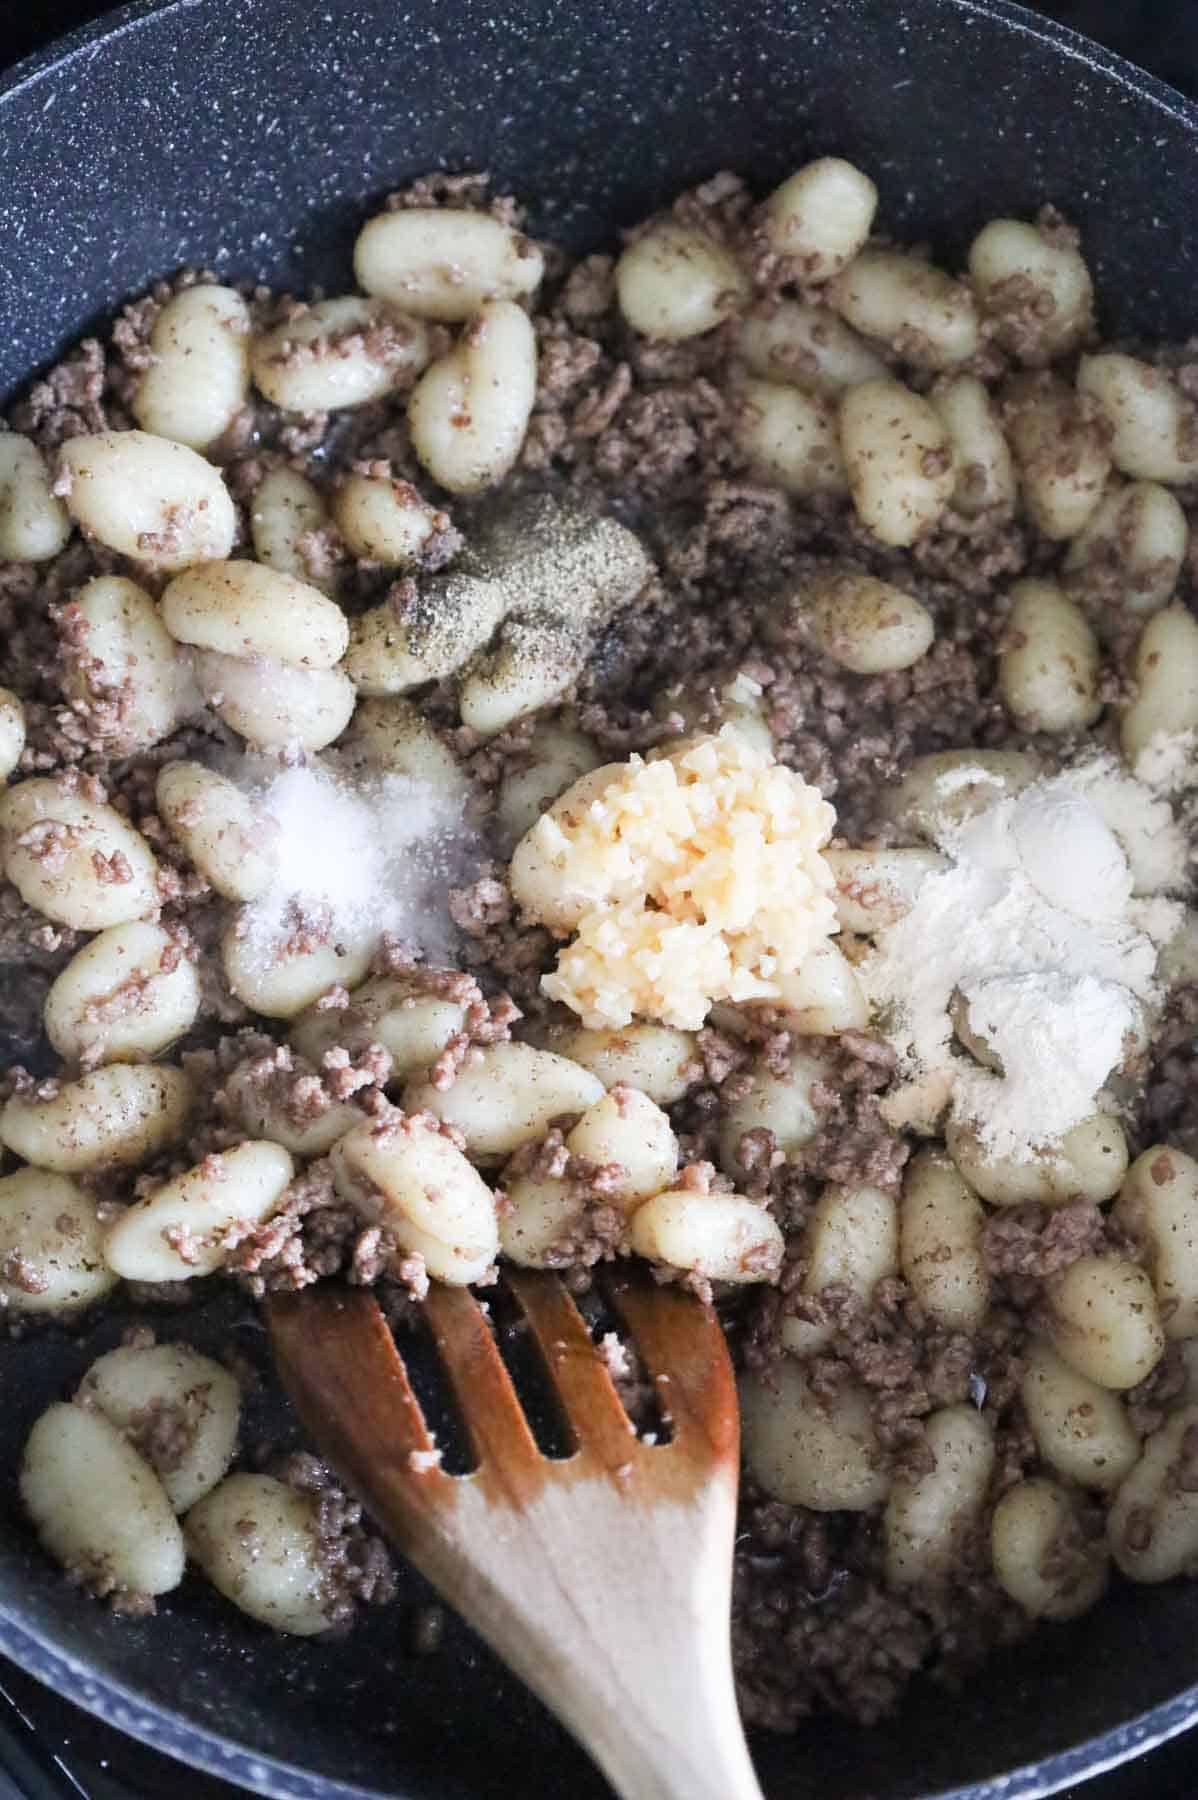 minced garlic, salt, pepper and onion powder on top of ground beef and gnocchi in a skillet